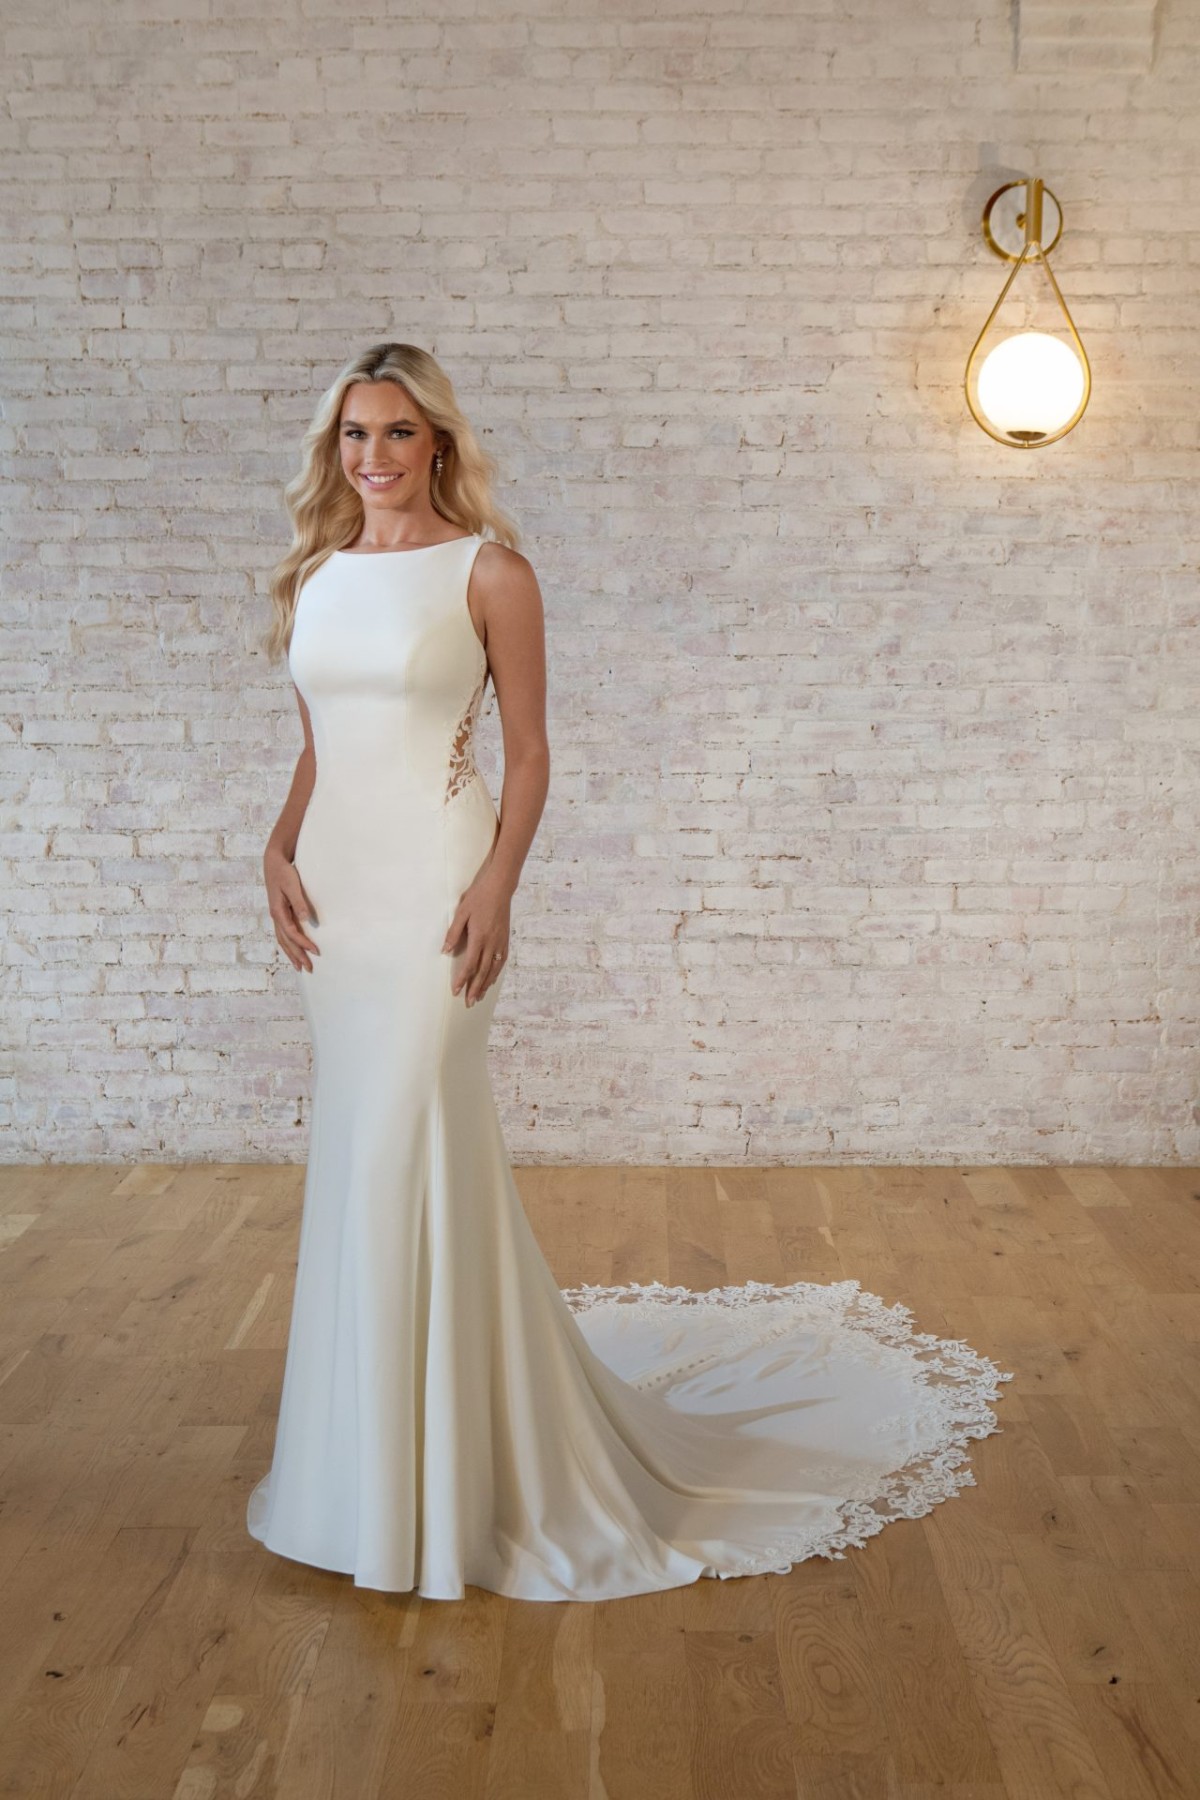 7664 - Harper - Stella York 7664, Simple Crepe fitted Wedding Dress - Modern & minimalist  Bridal Designs  by Stella York in store at Blessings Bridal Boutique - Loyal Parade, Mill Rise Westdene, Brighton. BN1 5GG T: 01273 505766 E: info@blessingsbridal.co.uk